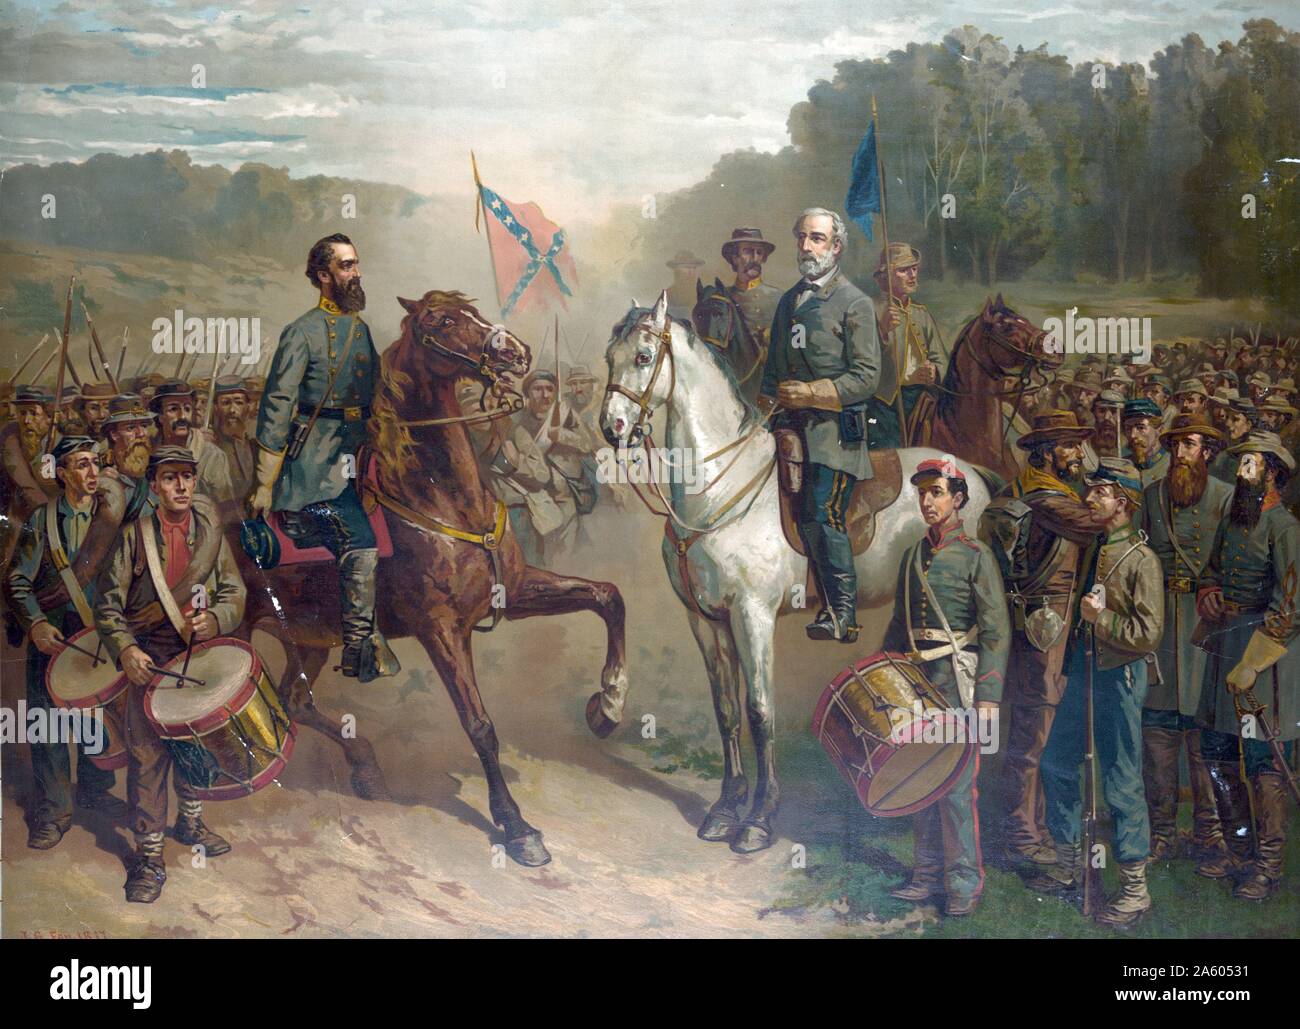 General Robert E. Lee; with troops; on the right and General Stonewall Jackson; with troops; on the left; both on horseback; meeting for the last time prior to Jackson's untimely death. Stock Photo